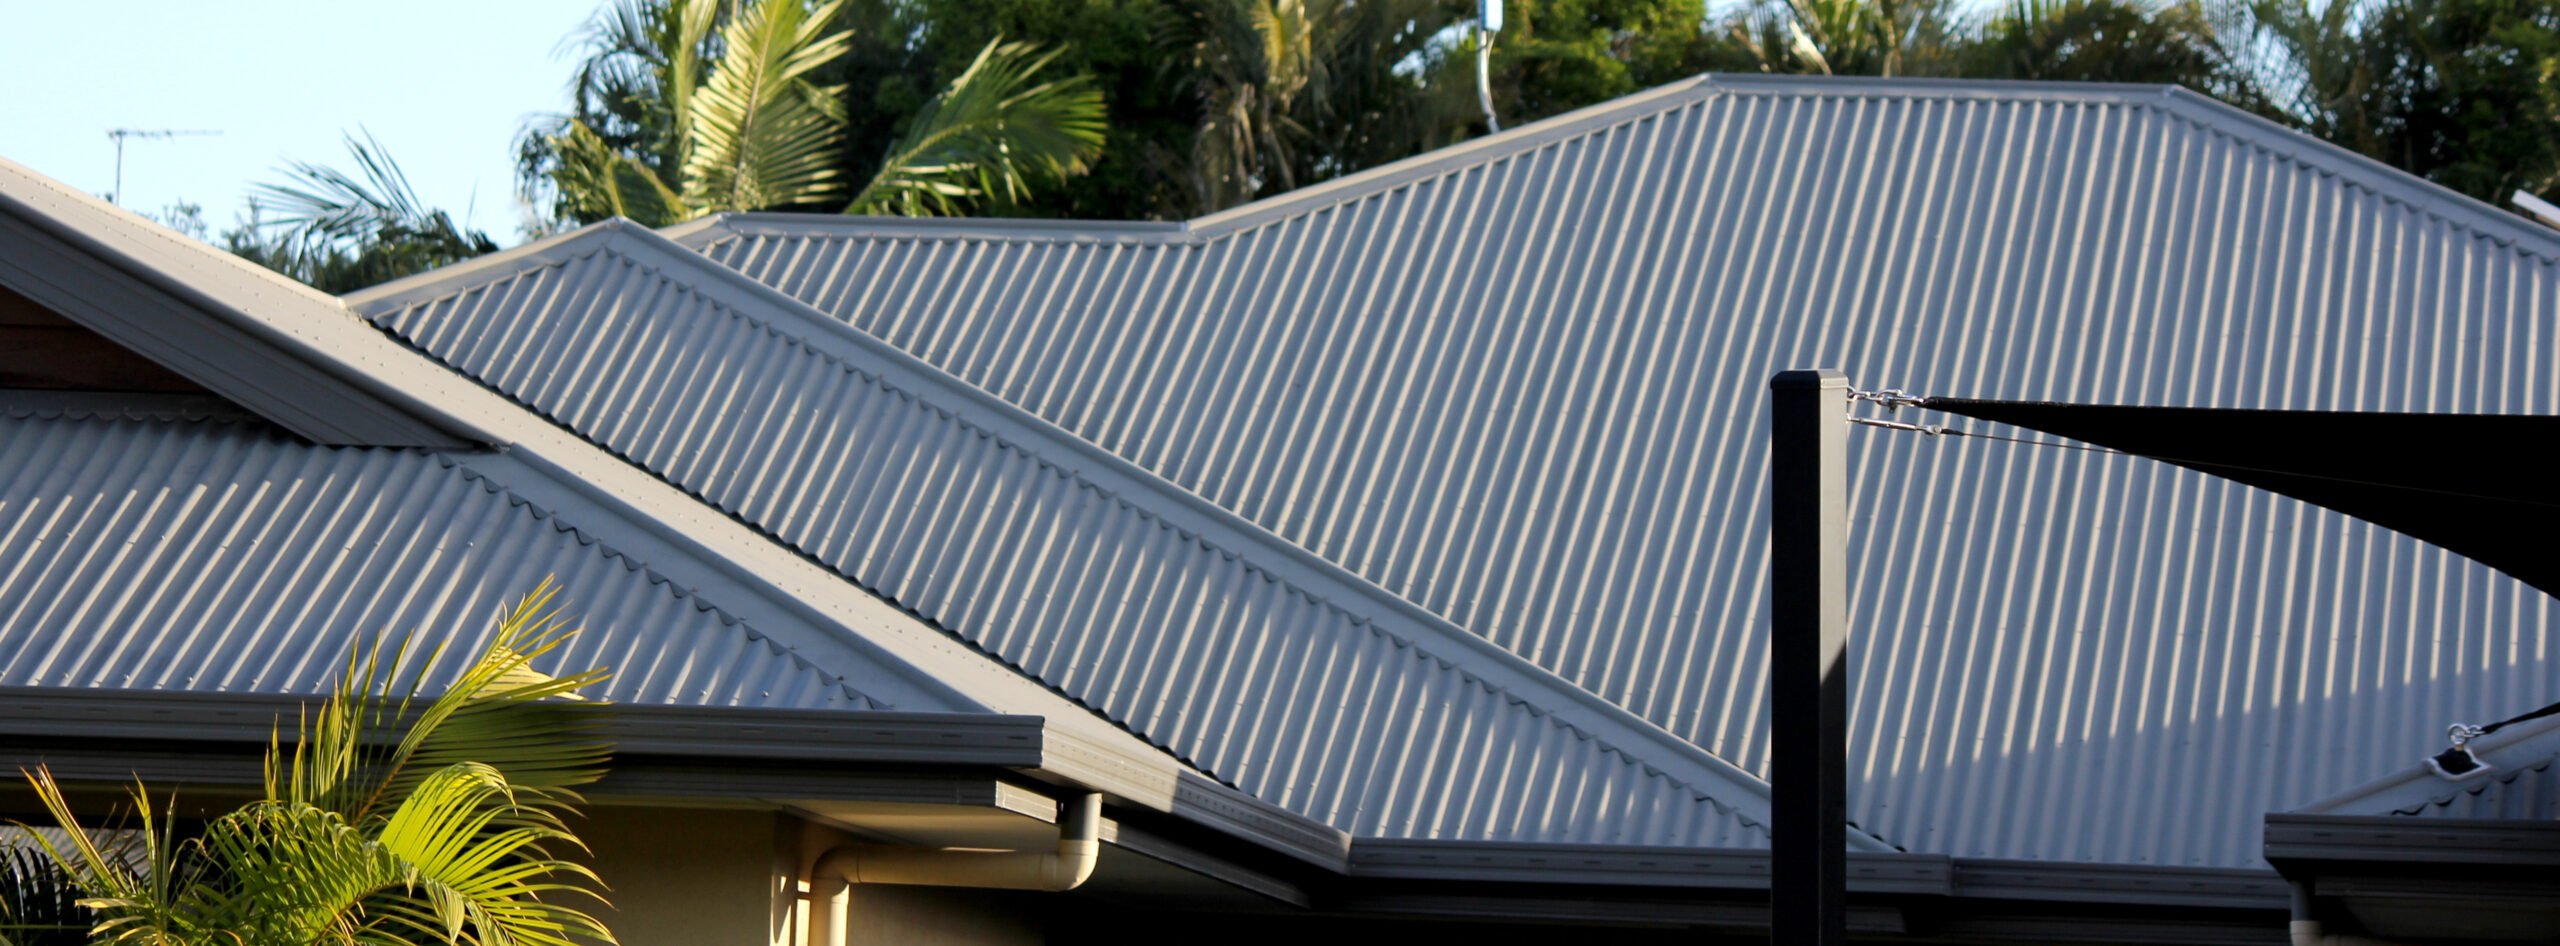 Tile vs Metal Roofing â which one is better?